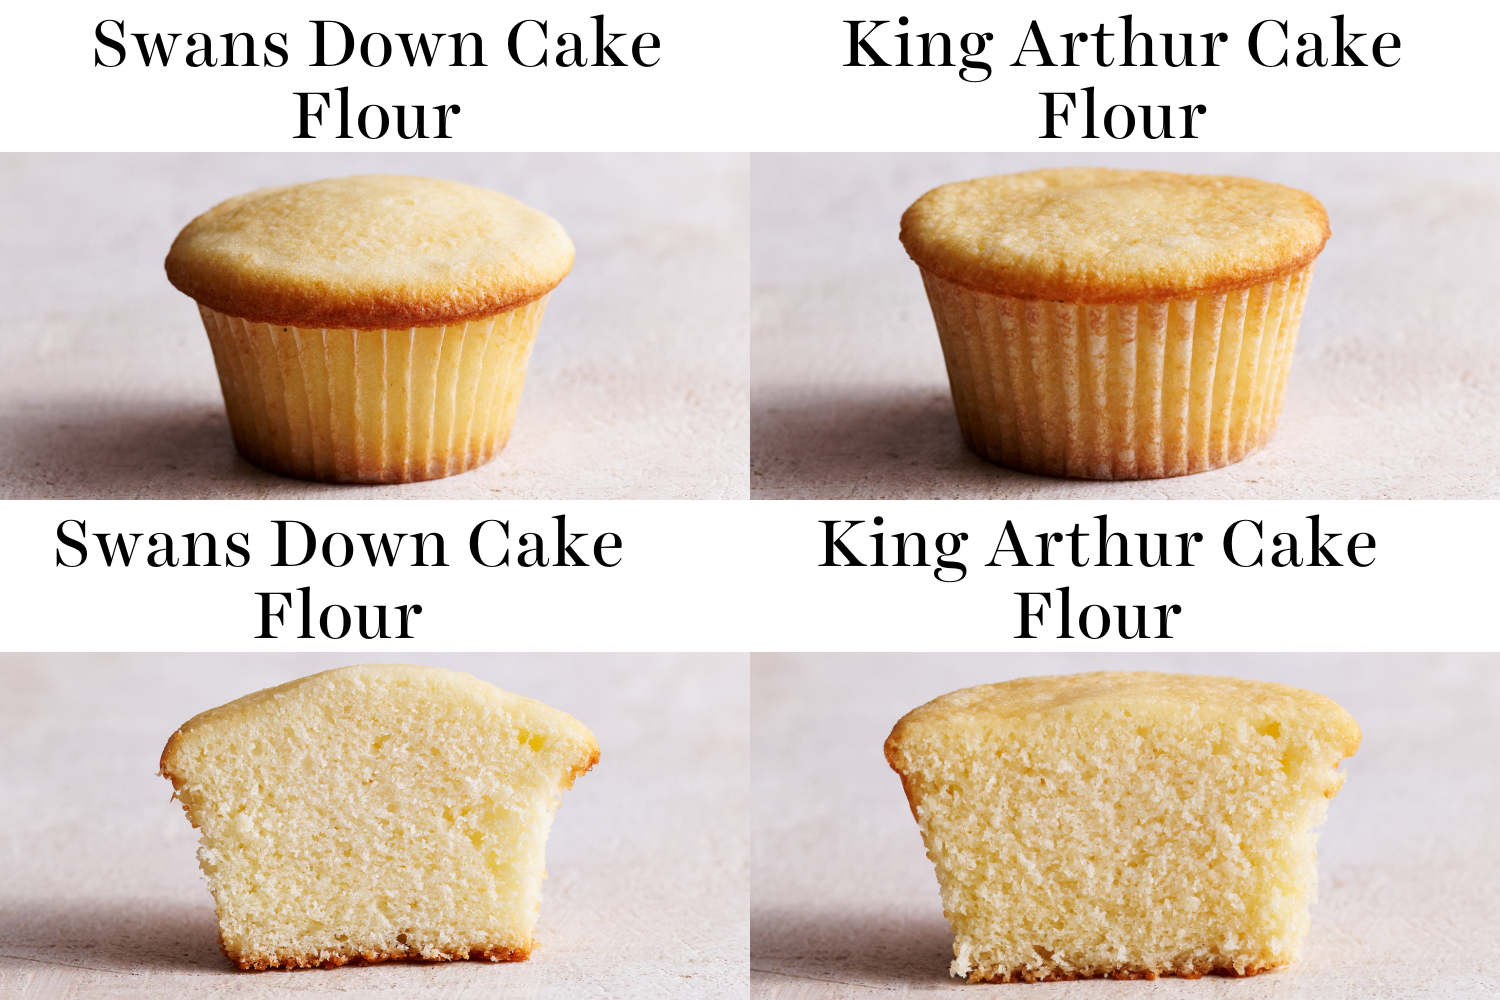 collage of four images, showing cupcakes made with Swans Down vs. King Arthur cake flour, showing both the outer/whole cupcake, and the interior of each.